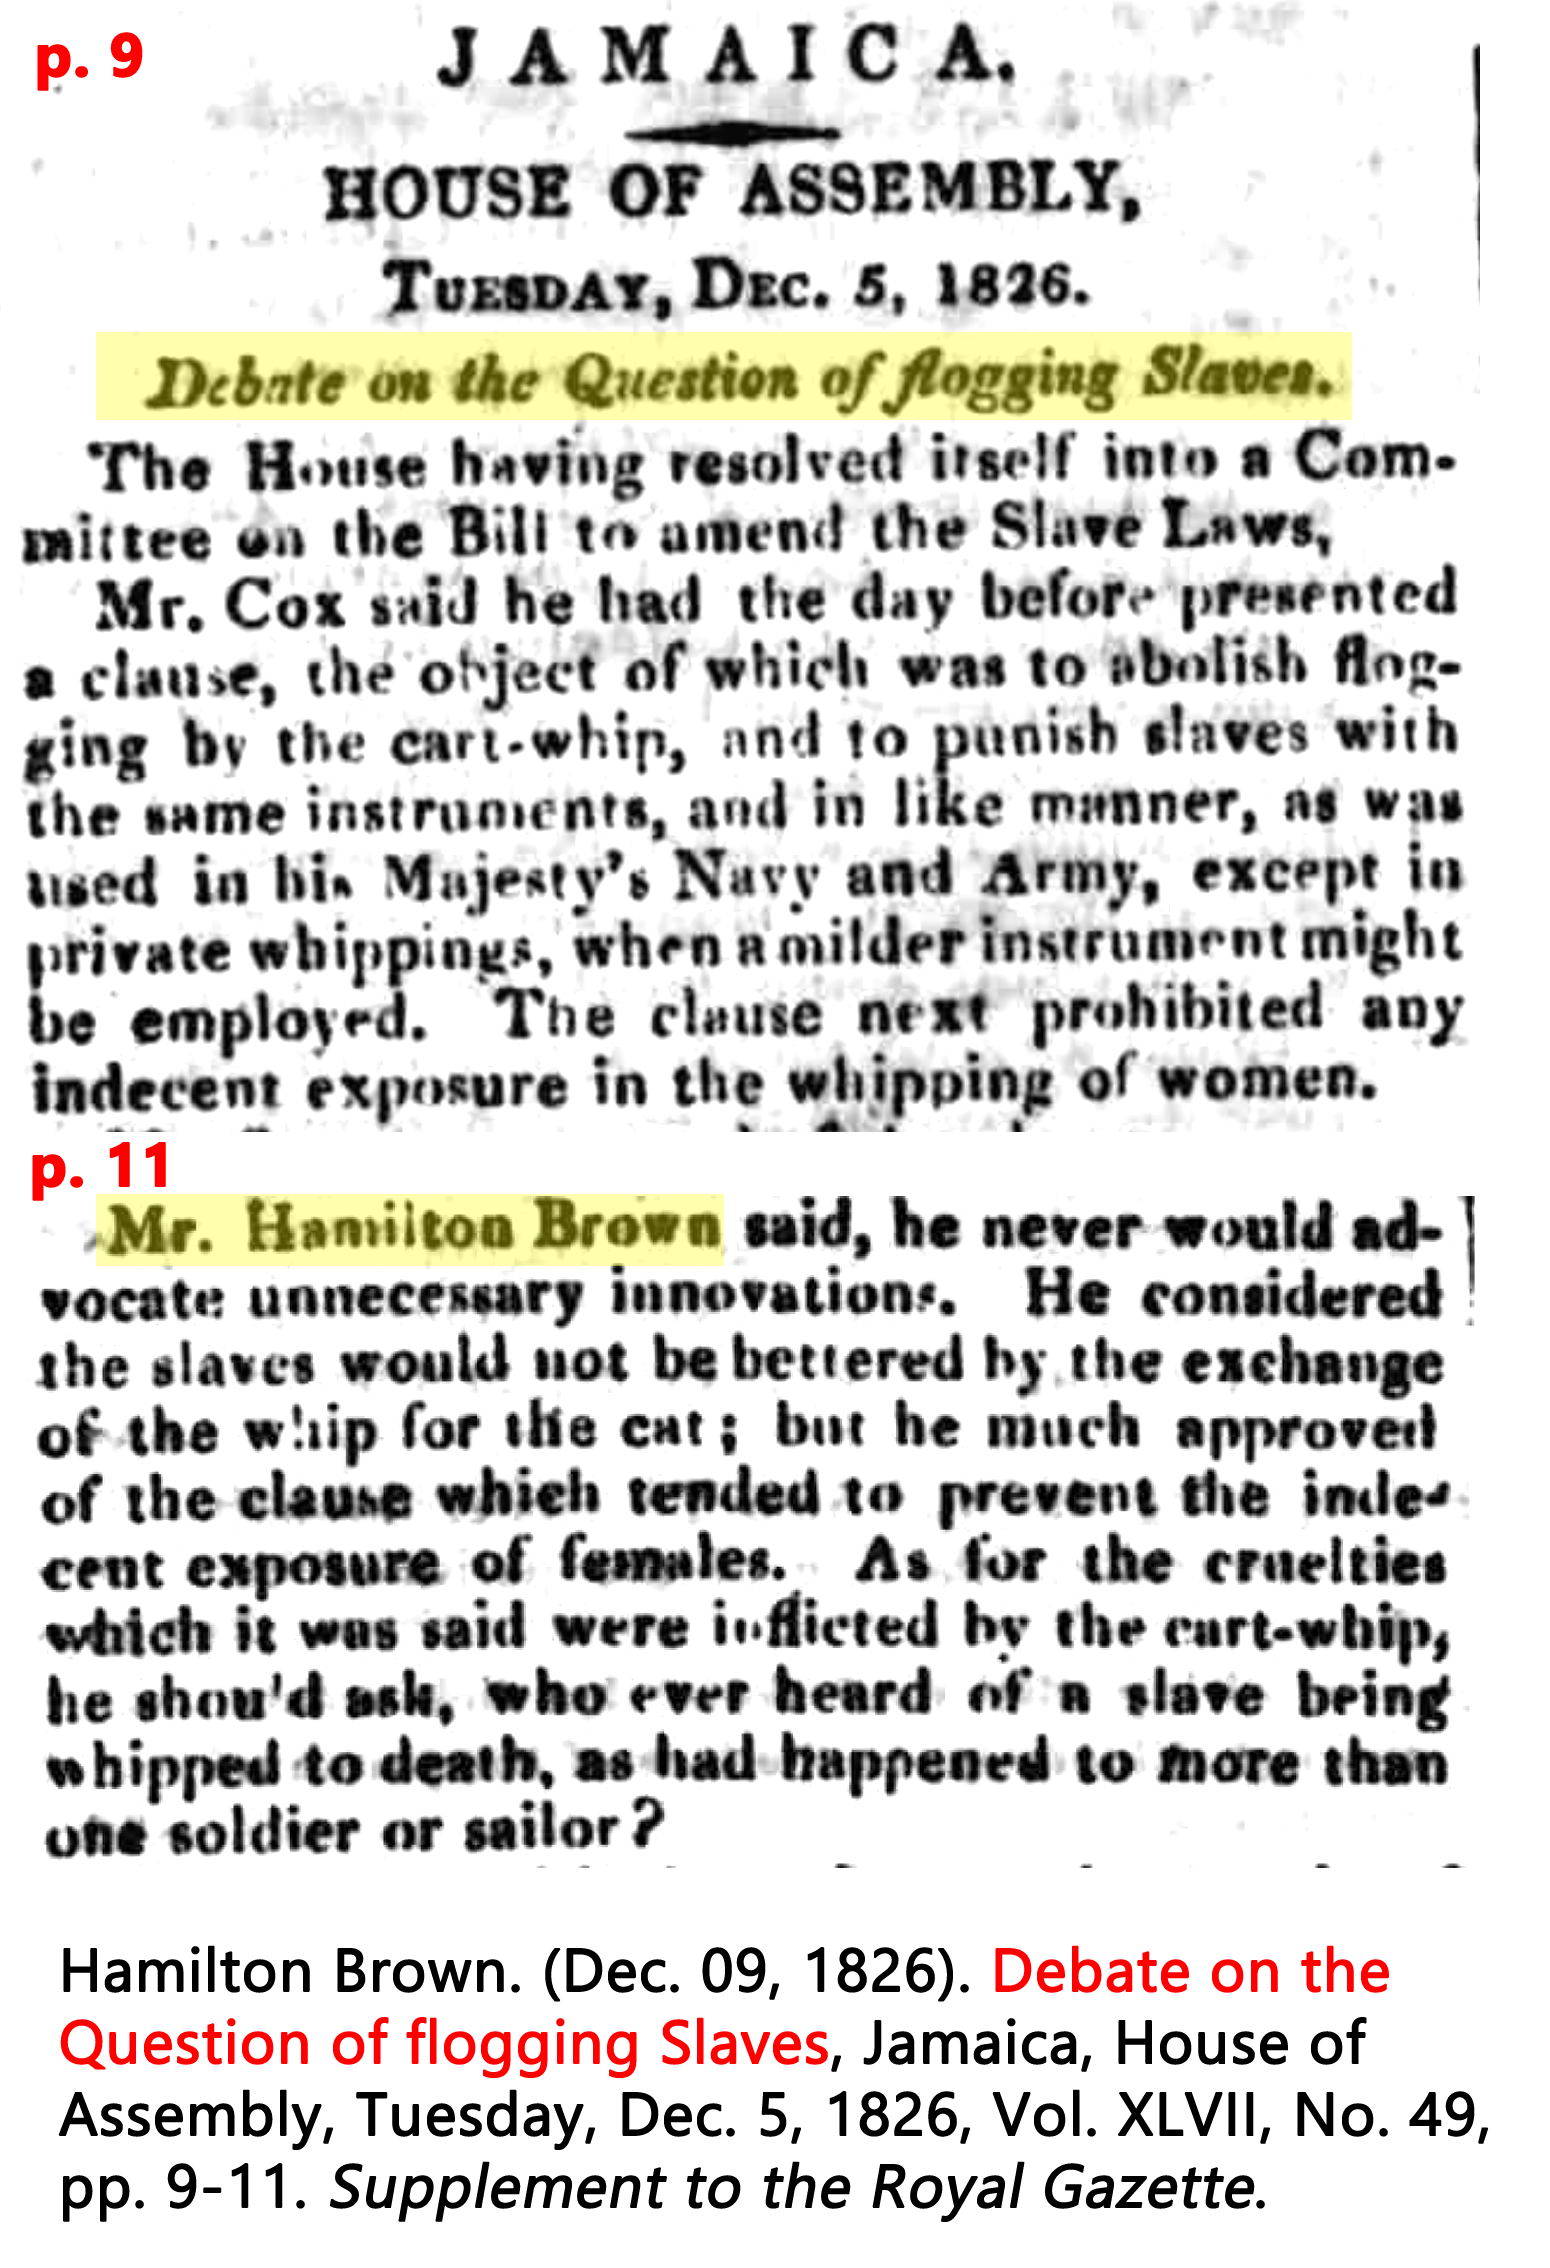 Hamilton Brown. (Dec. 09, 1826). Debate on the Question of flogging Slaves, Jamaica, House of Assembly, Tuesday, Dec. 5, 1826, Vol. XLVII, No. 49, pp. 9-11. Supplement to the Royal Gazette.